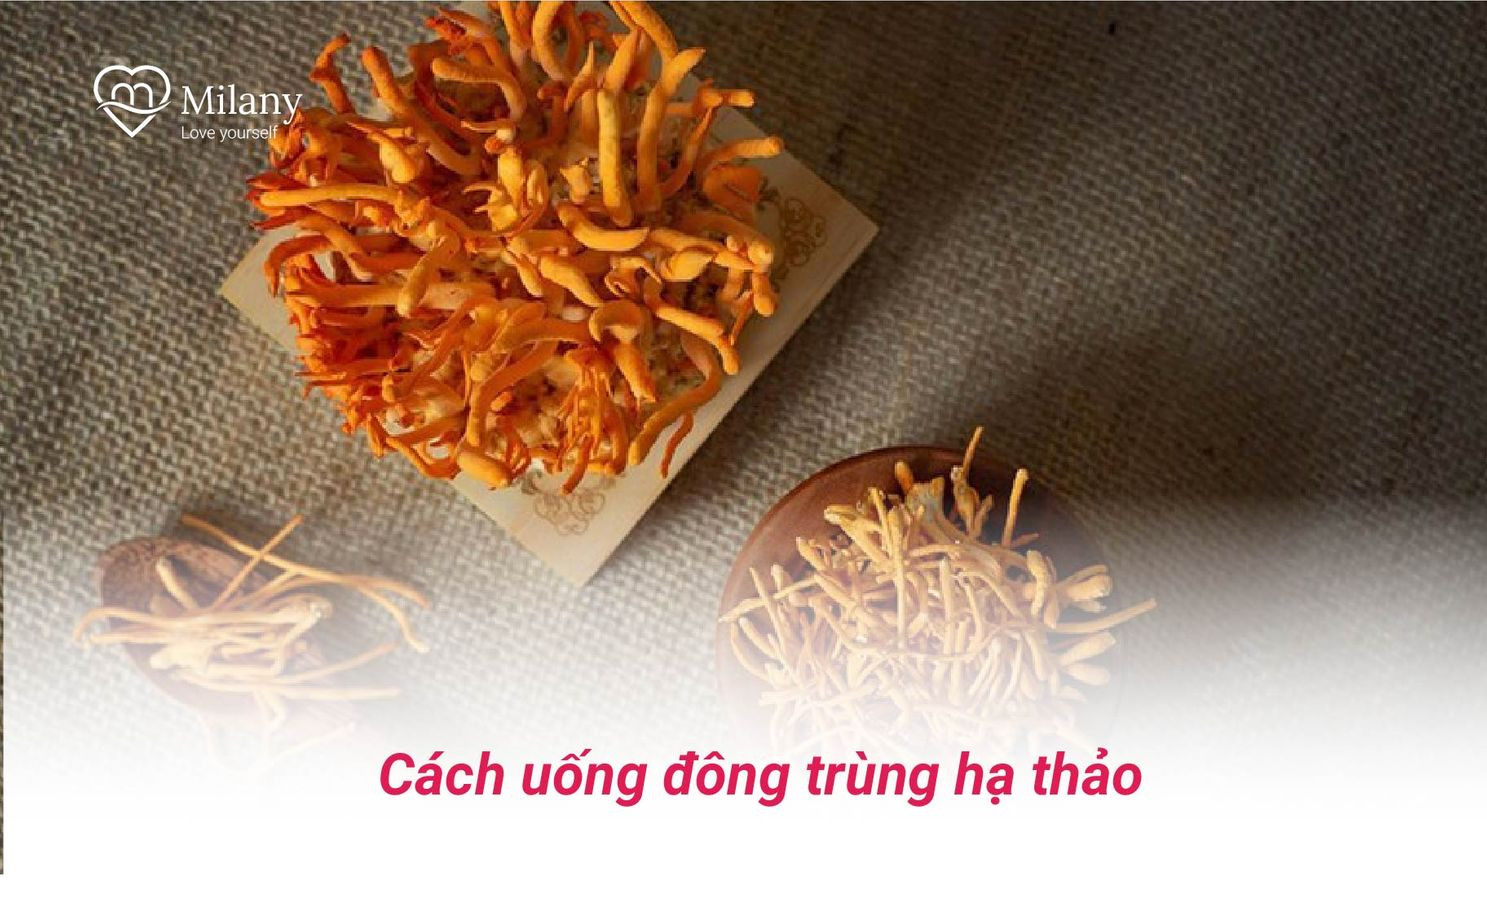 cach uong dong trung ha thao nuoc